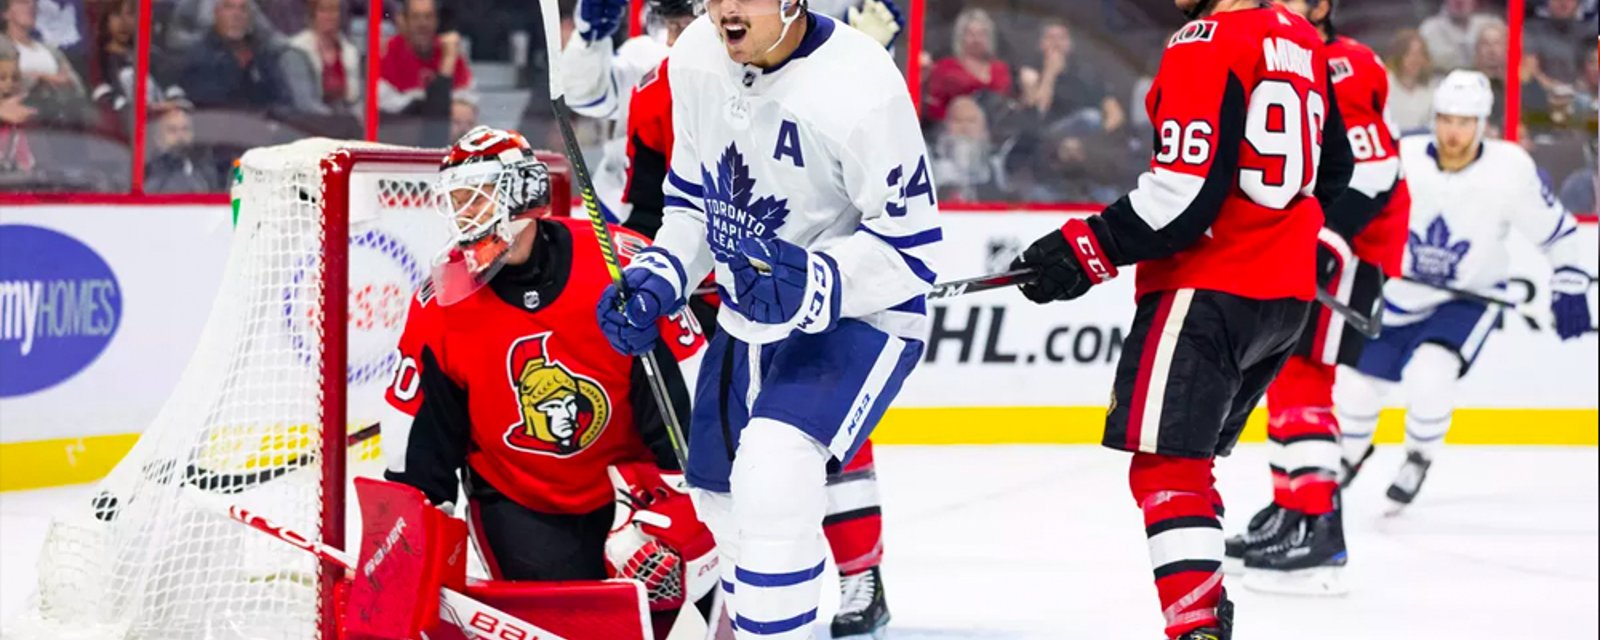 Province of Ontario officially grants Leafs and Sens permission to host games in 2021 season